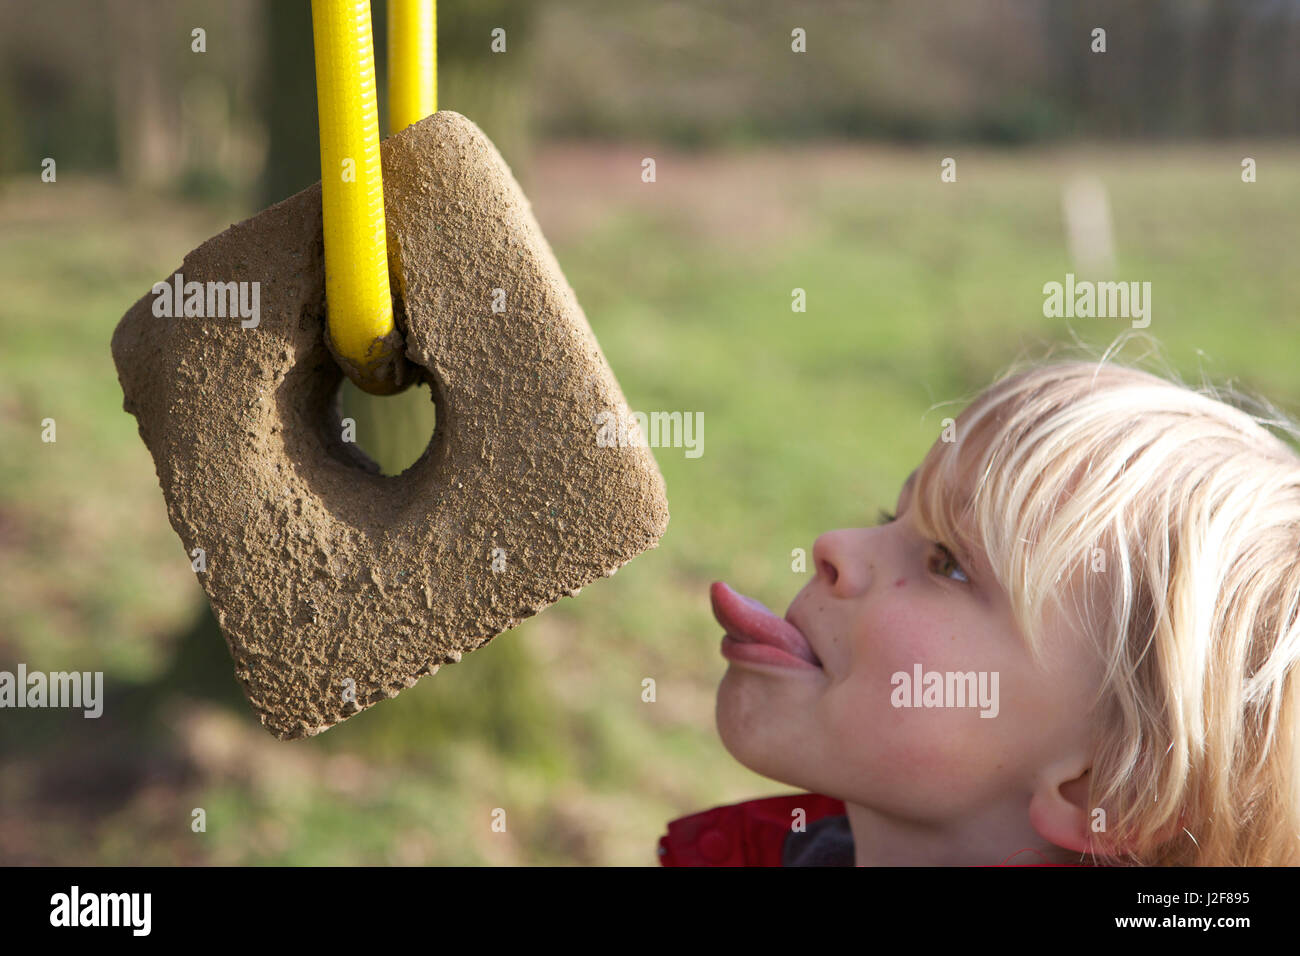 A boy near a mineral lick for cows Stock Photo